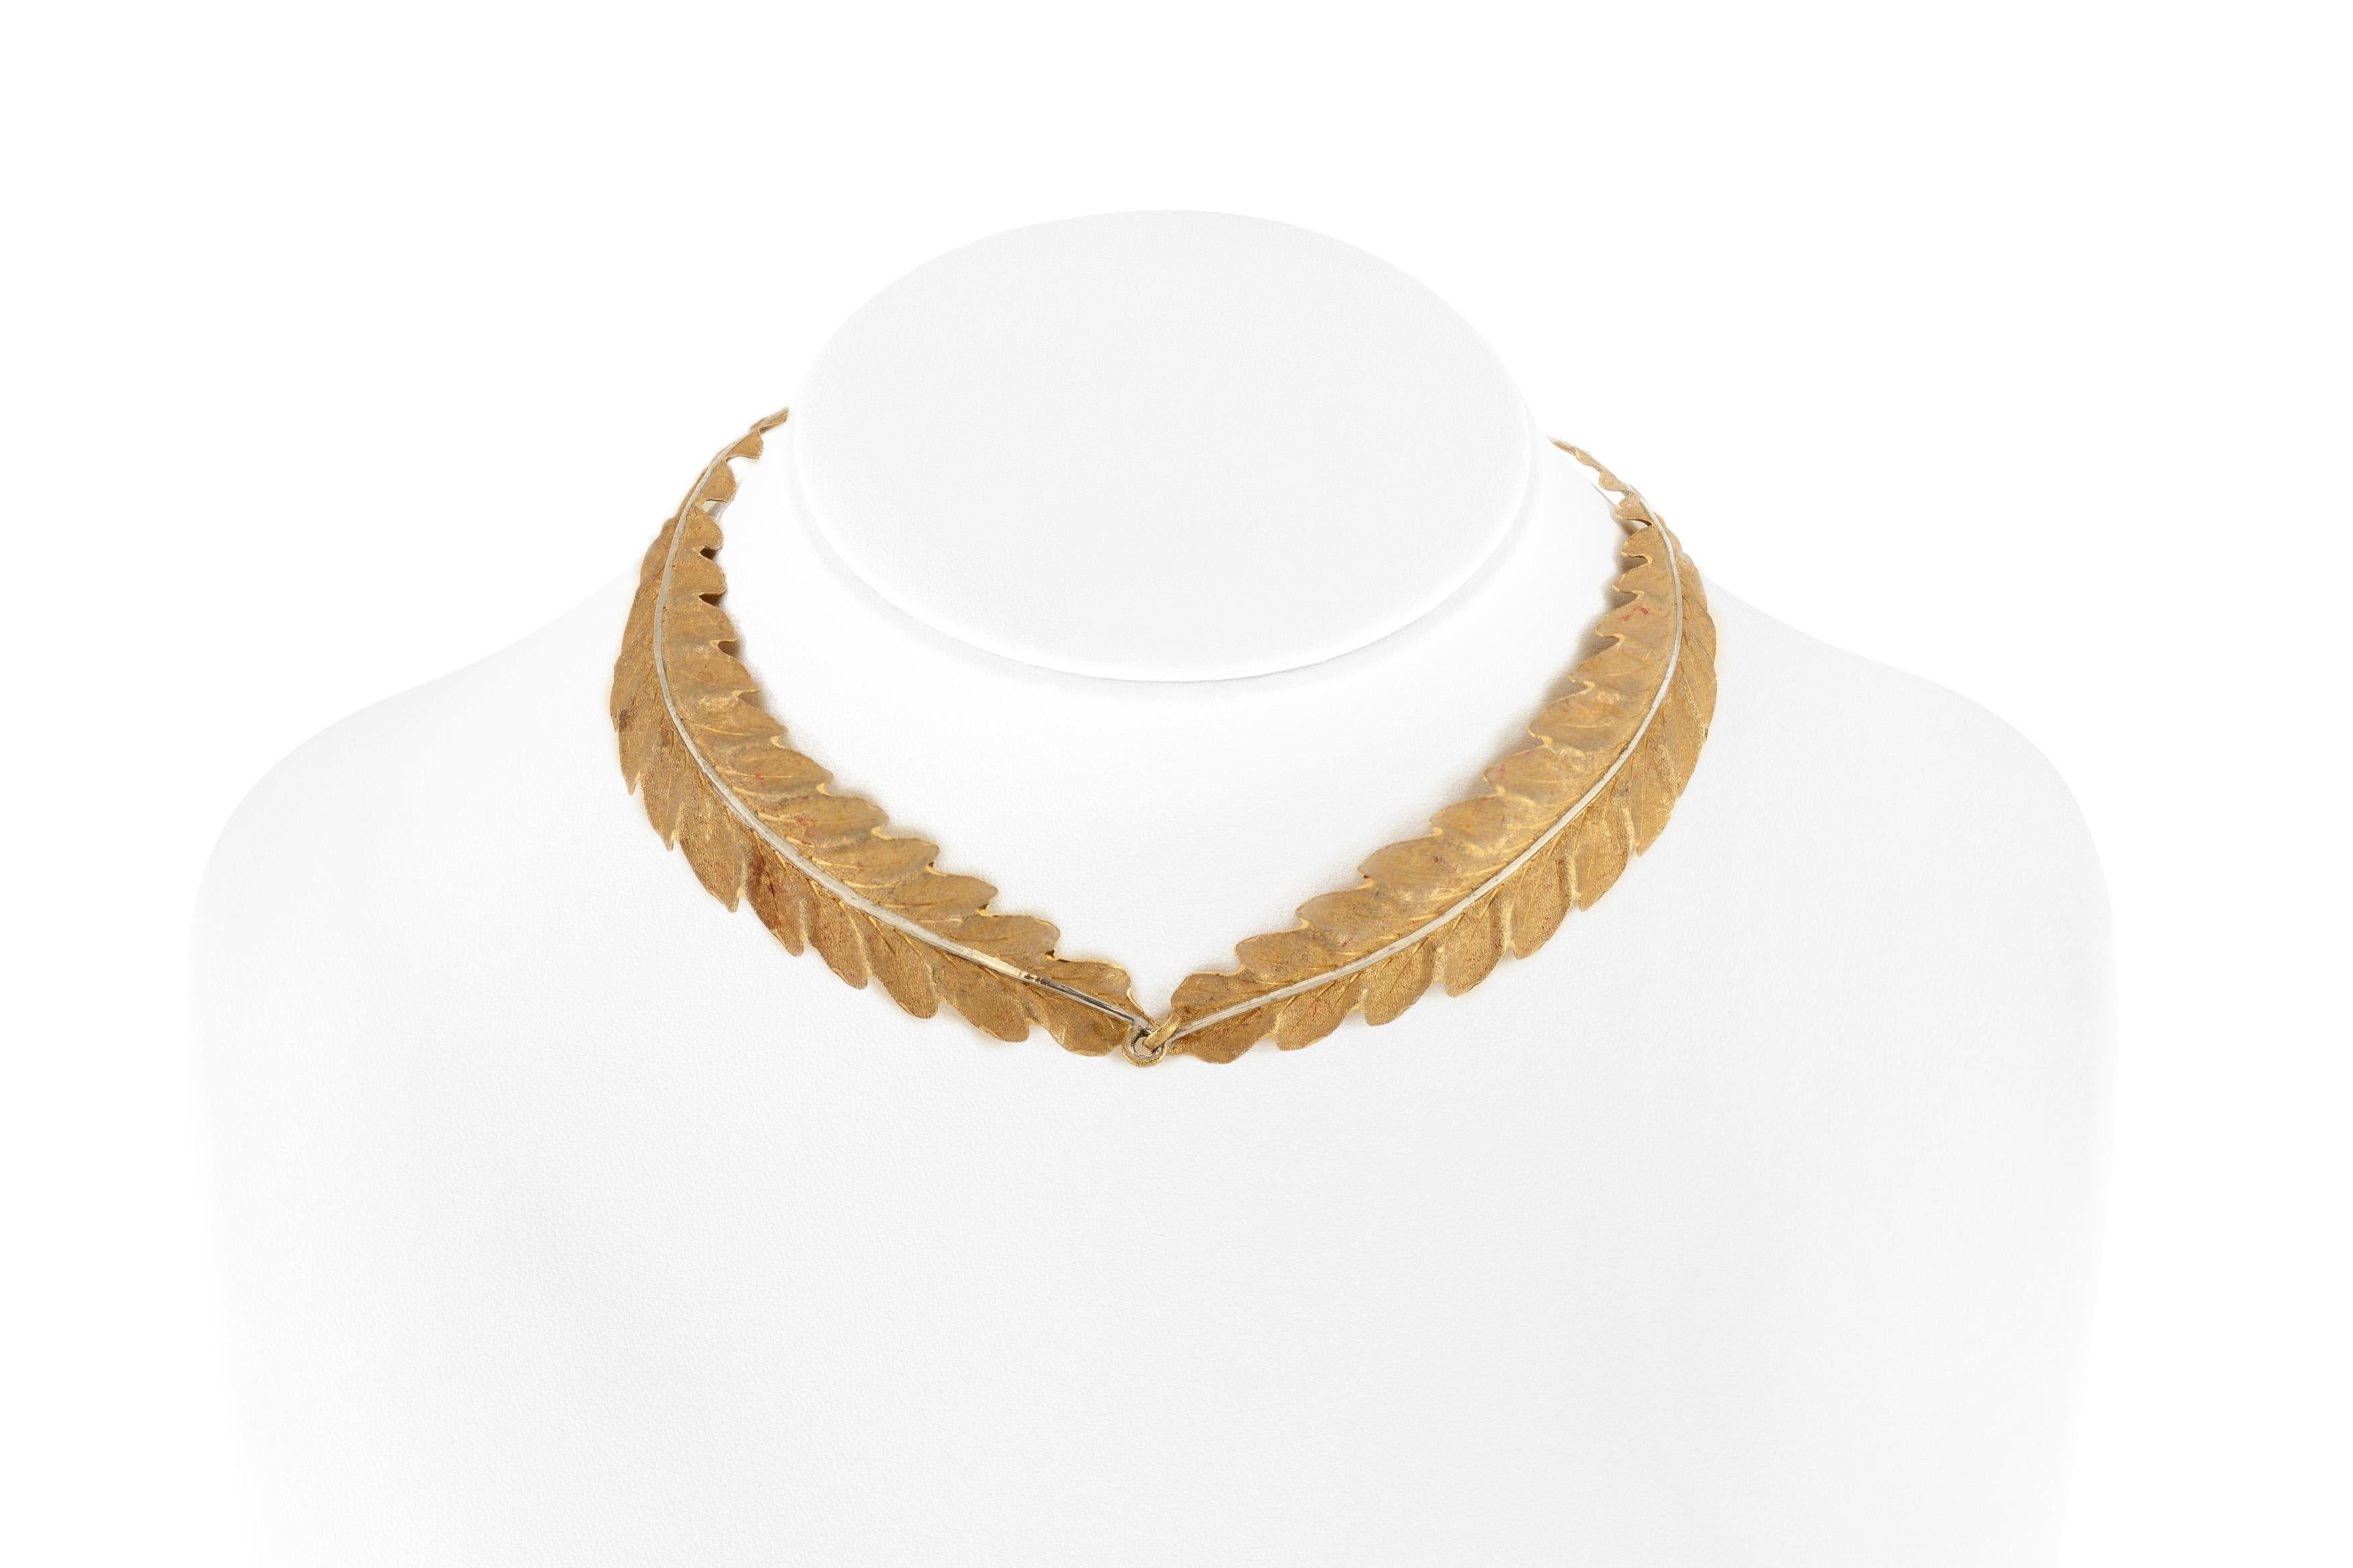 The necklace is finely crafted in 18k yellow gold and sign Buccellati.